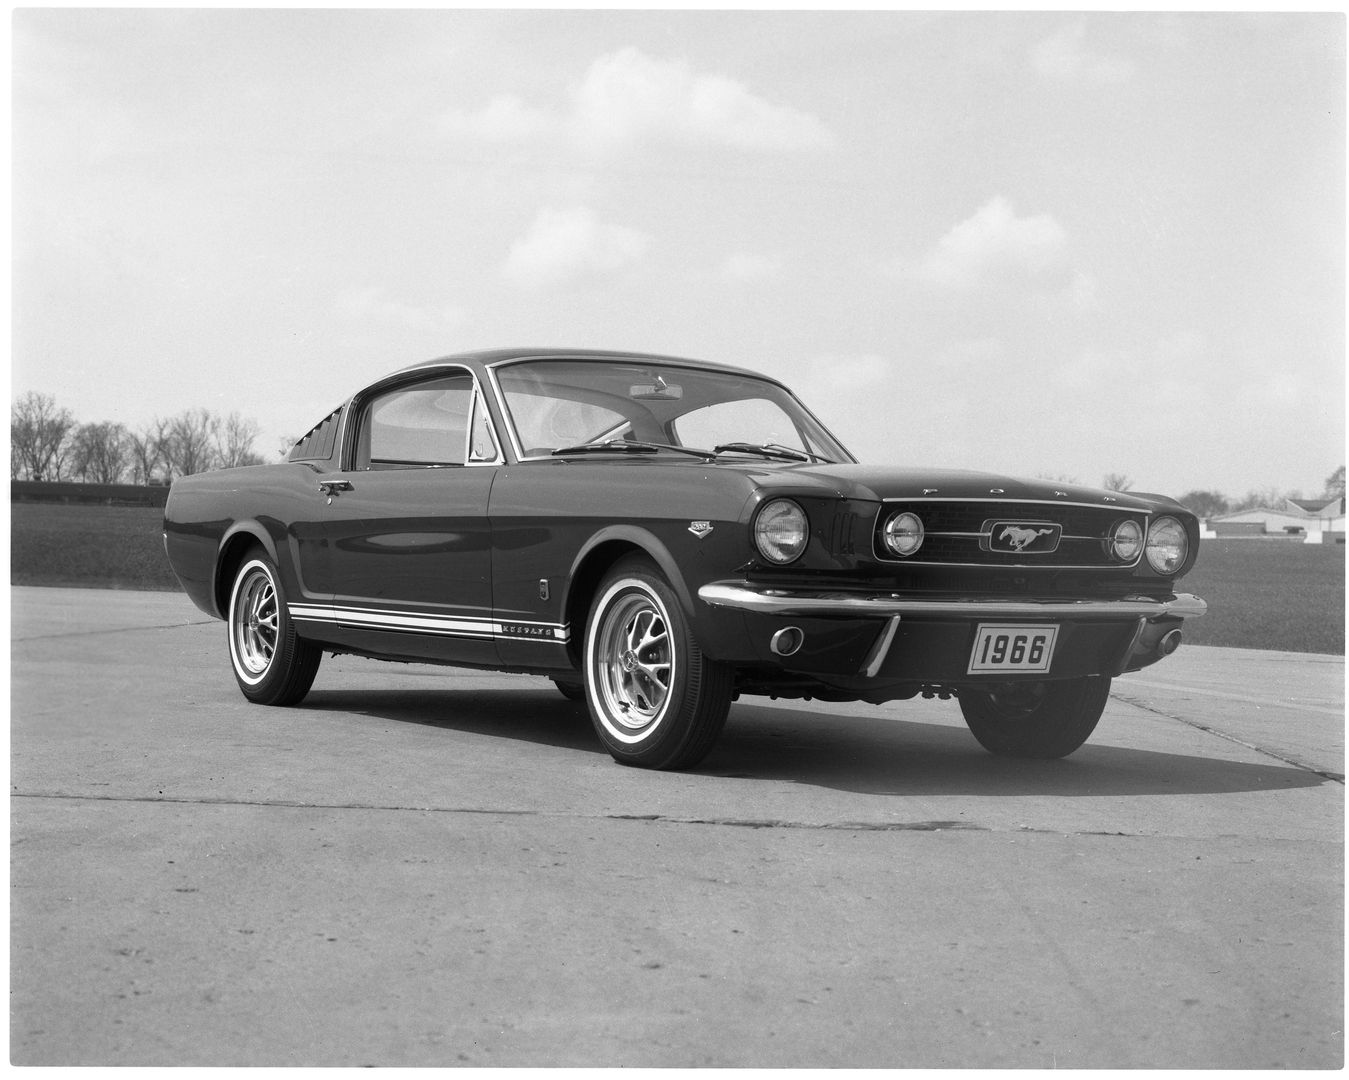 Black 1966 Ford Mustang